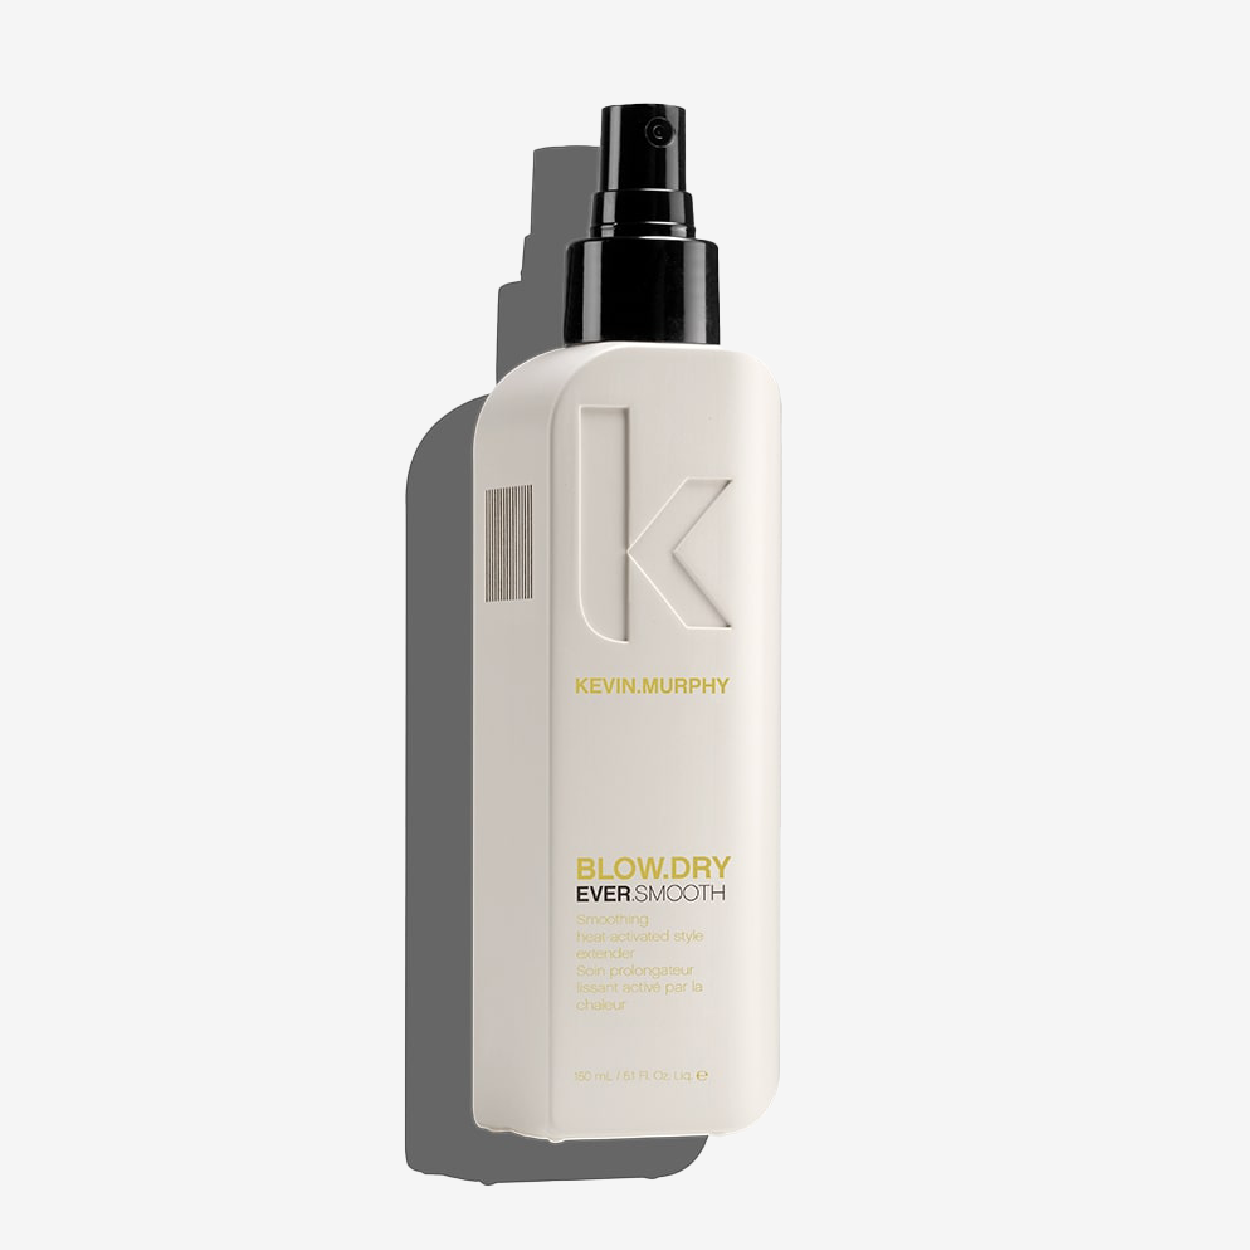 EVER.SMOOTH 150 ml